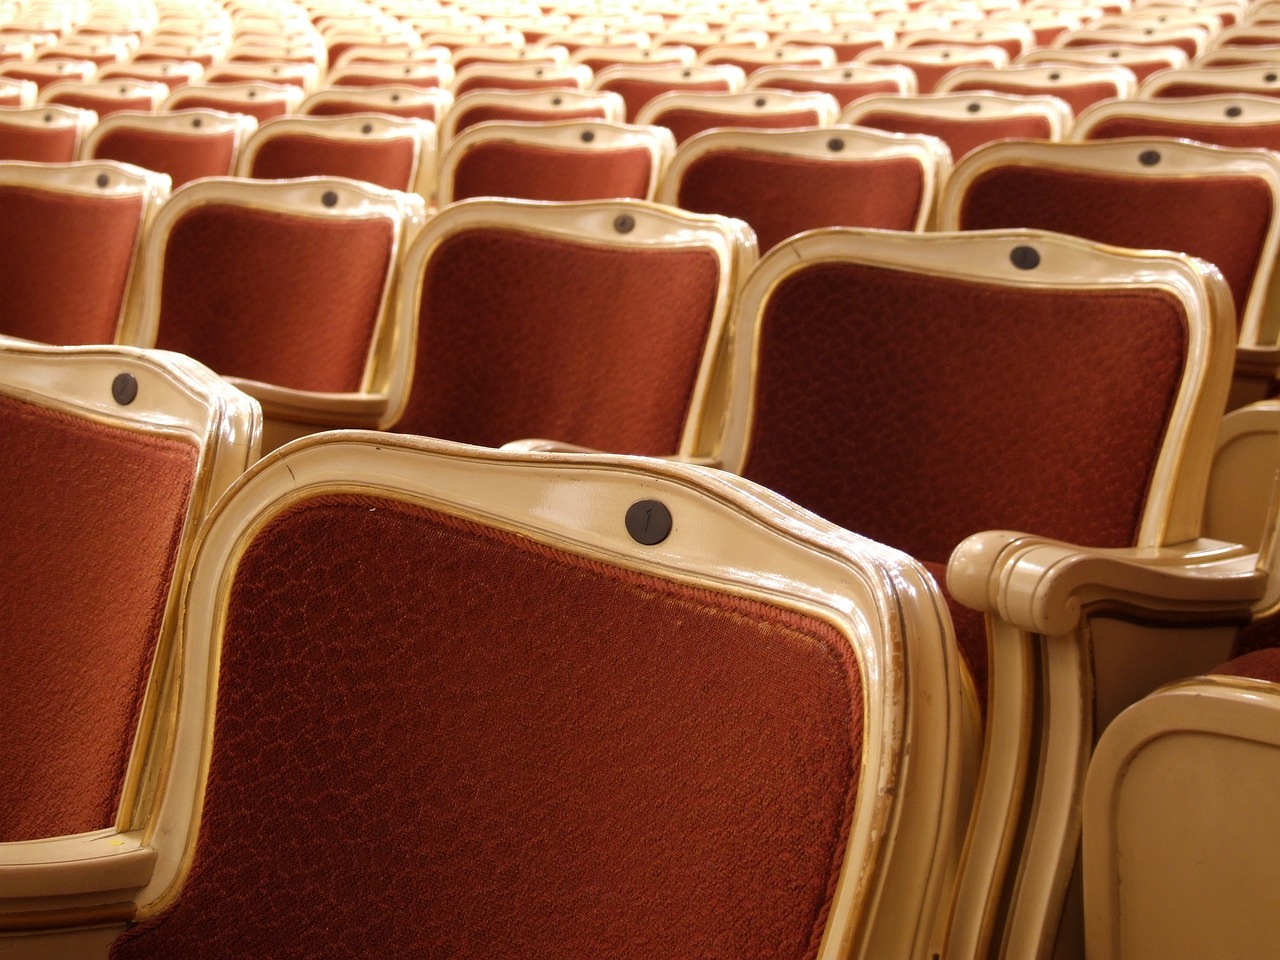 theater seats furniture audience free photo